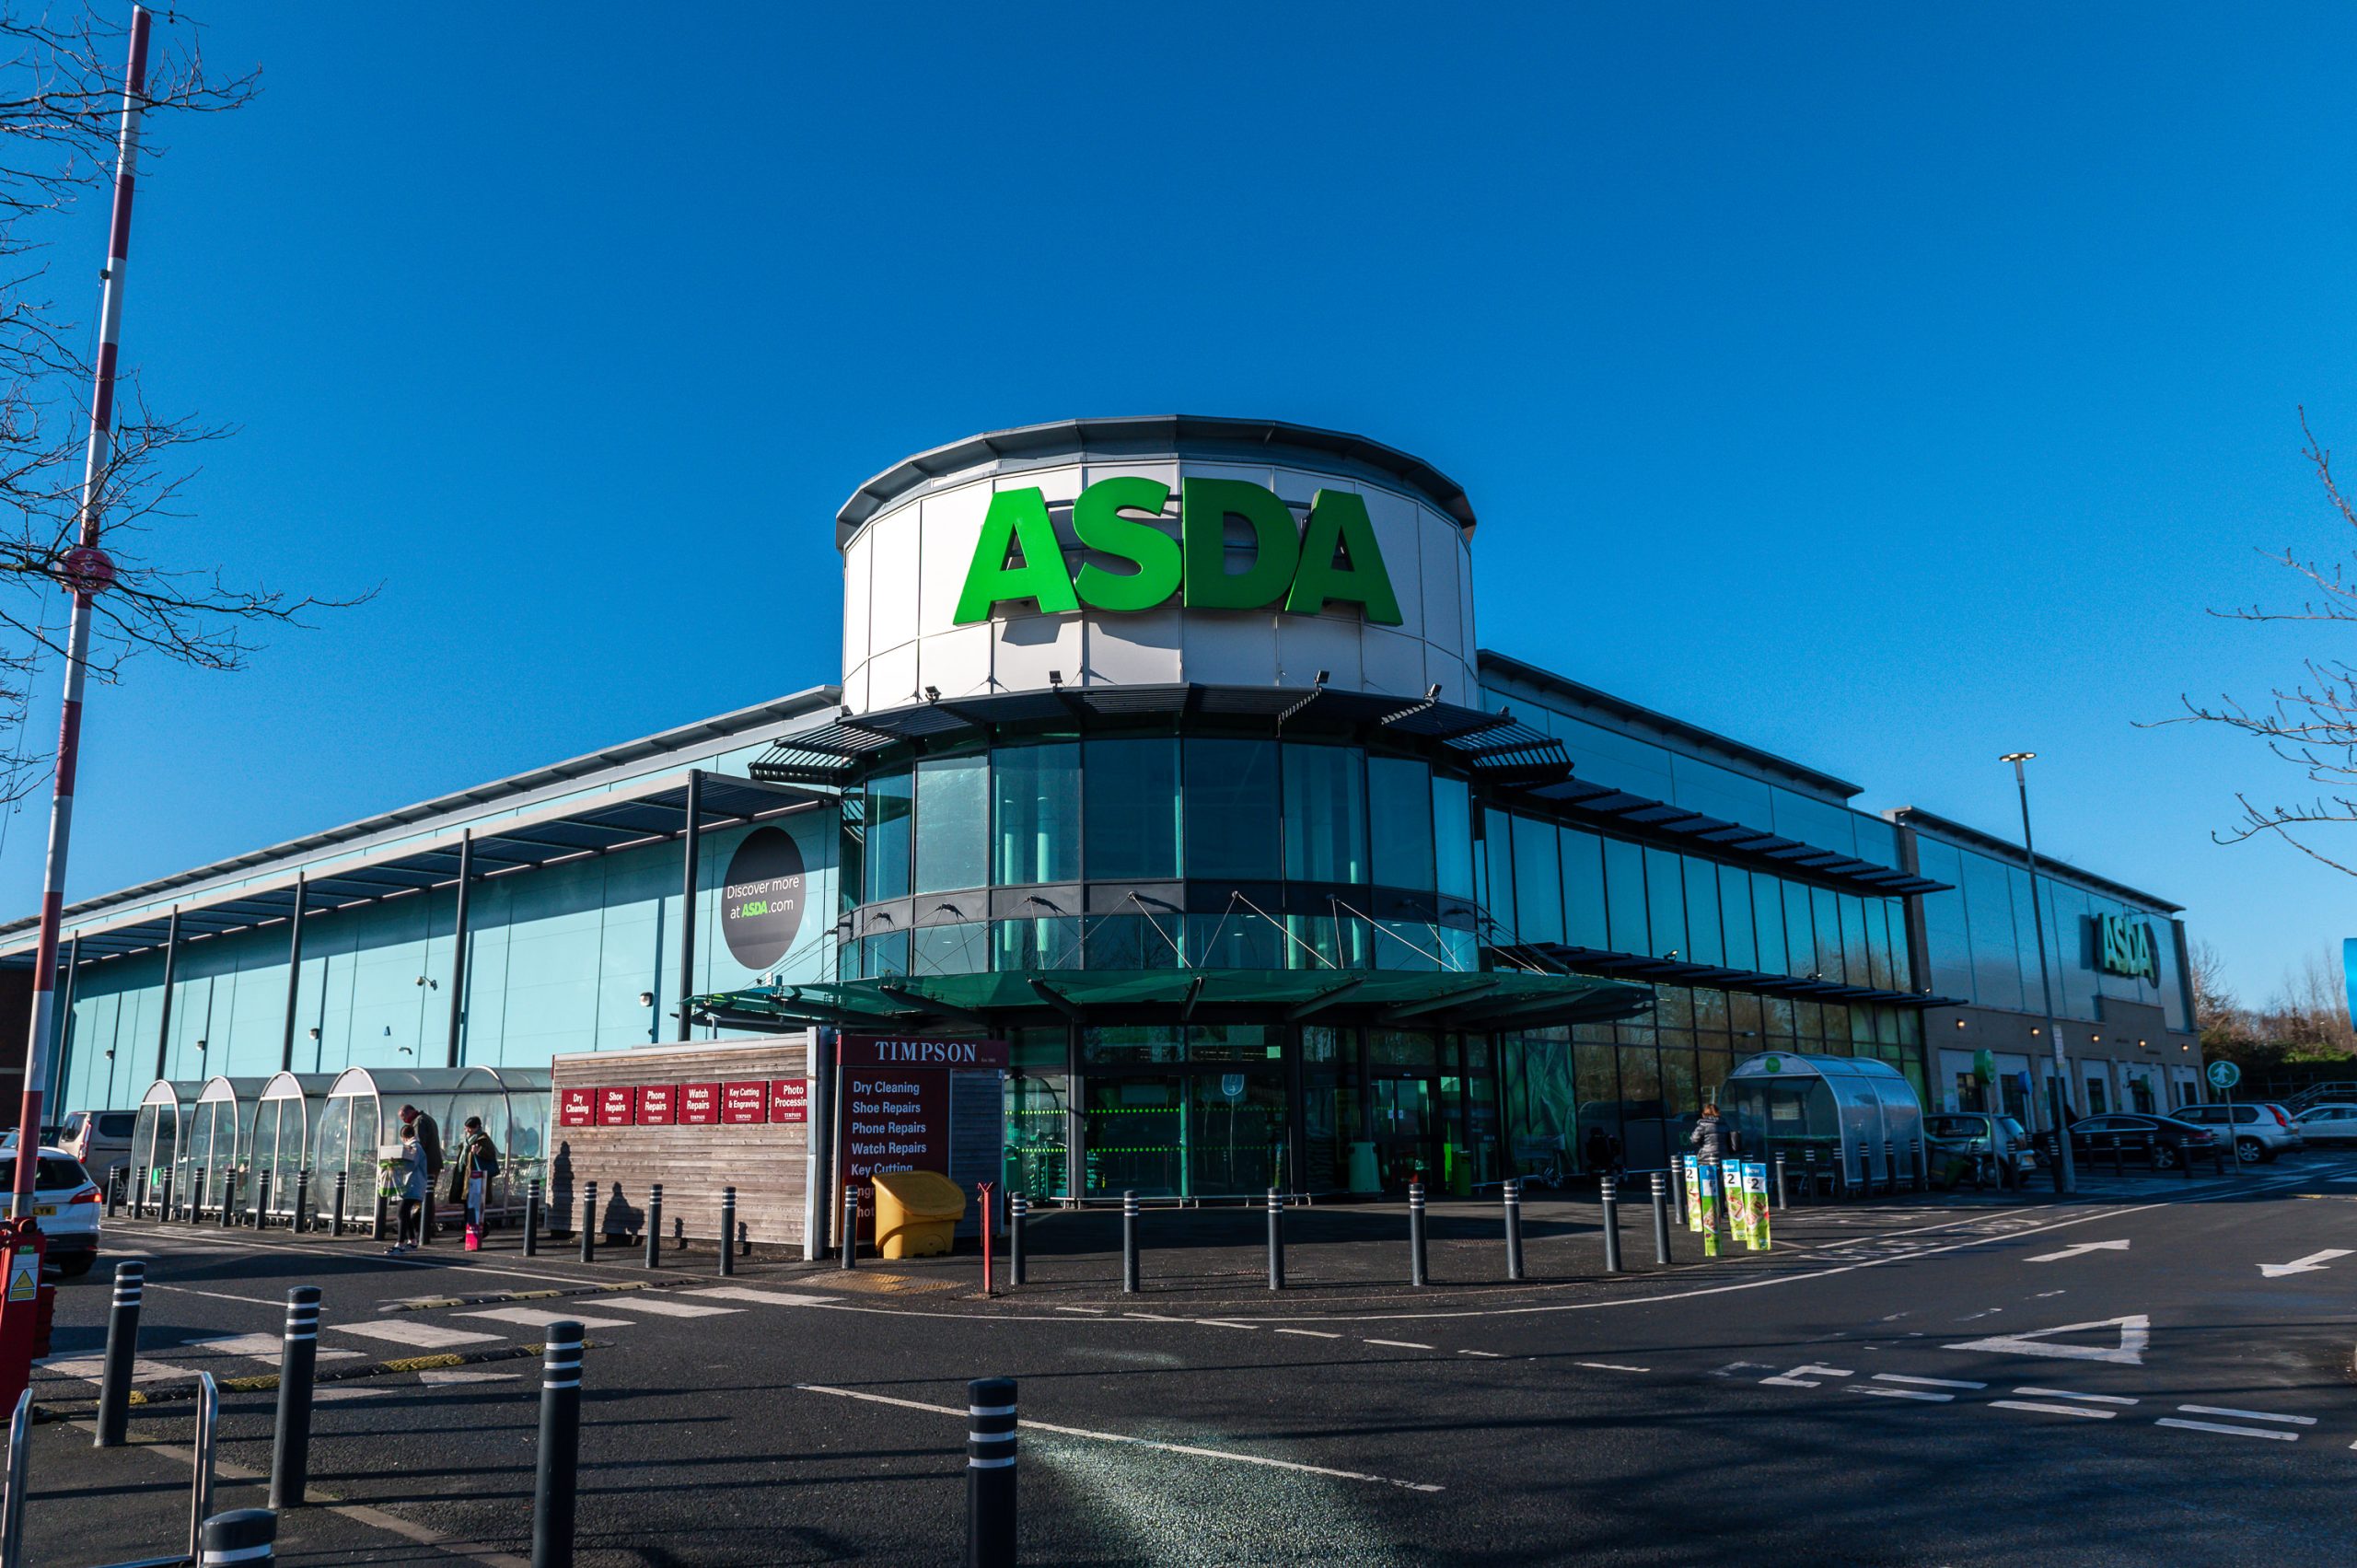 NEWS | Asda to provide £1m support package for Ukrainian families and remove Russian products from sale